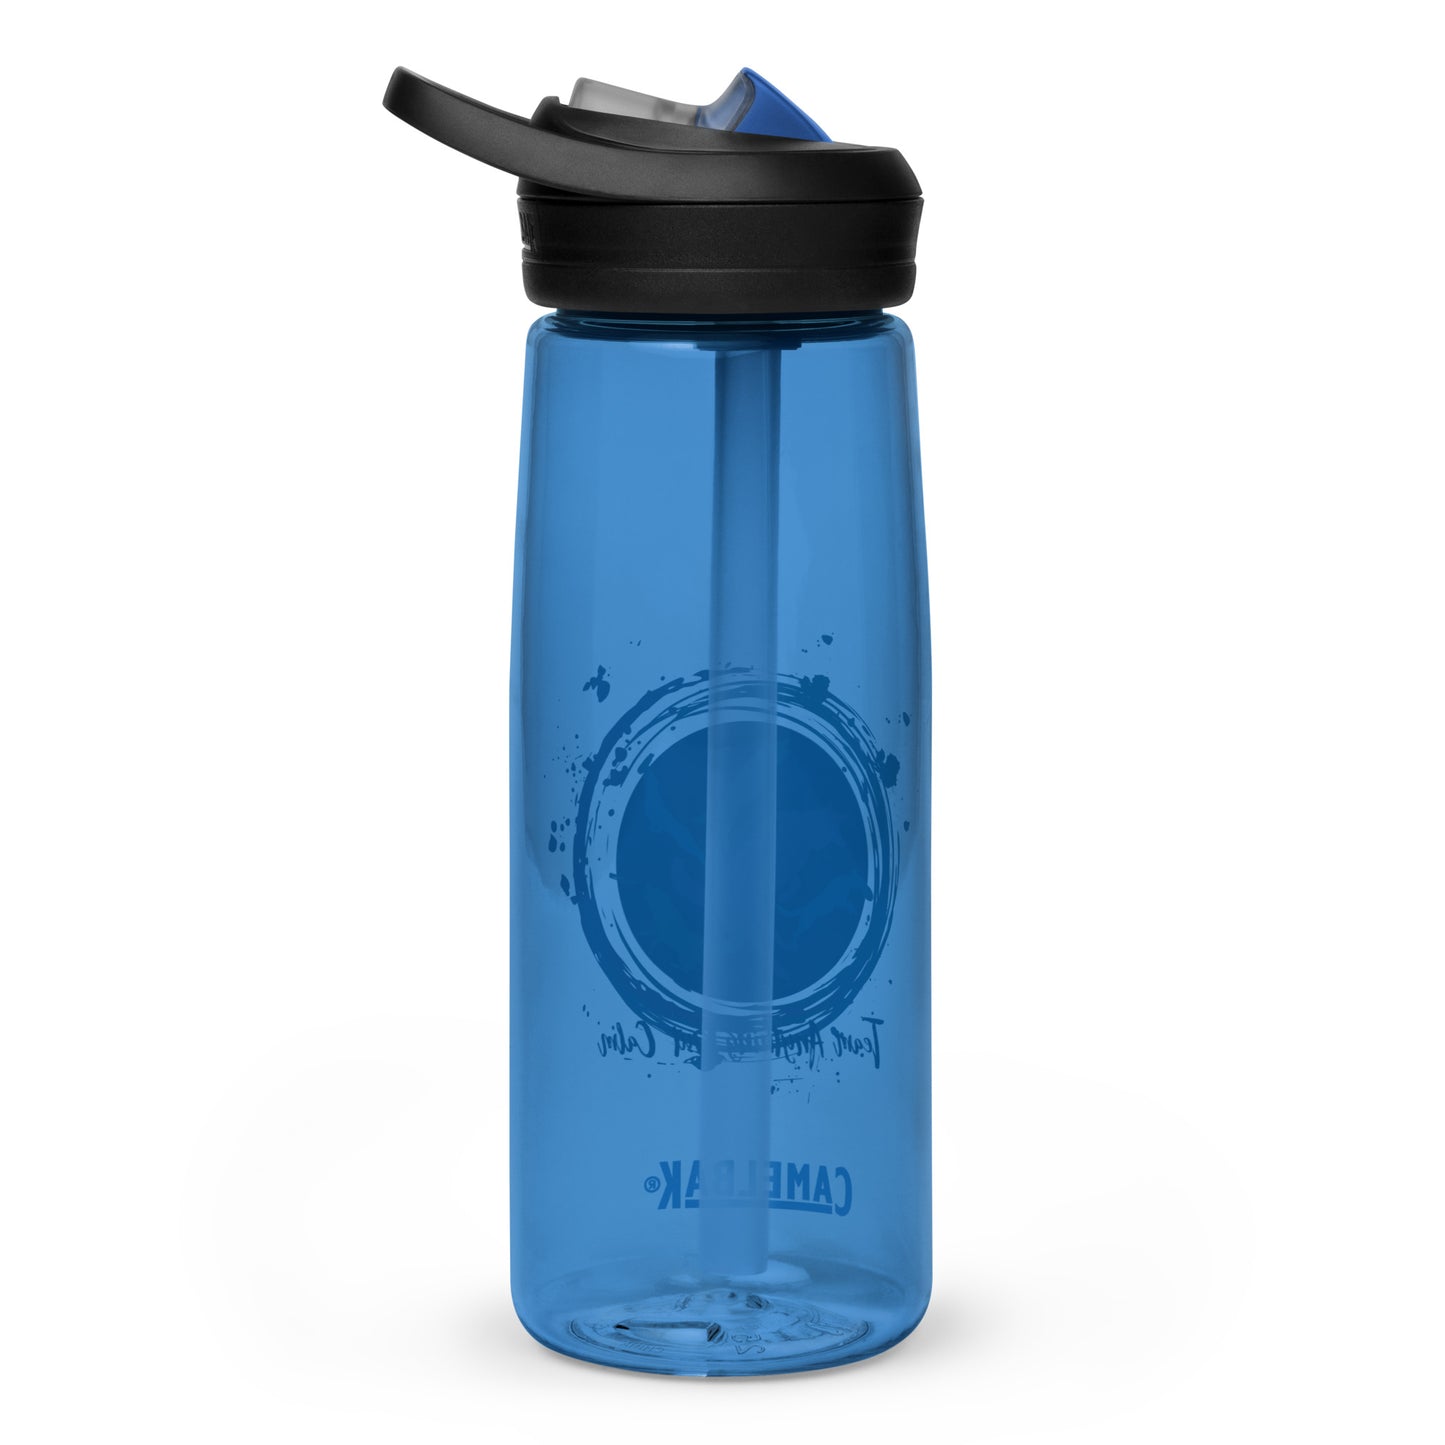 Anything but Calm Sports water bottle